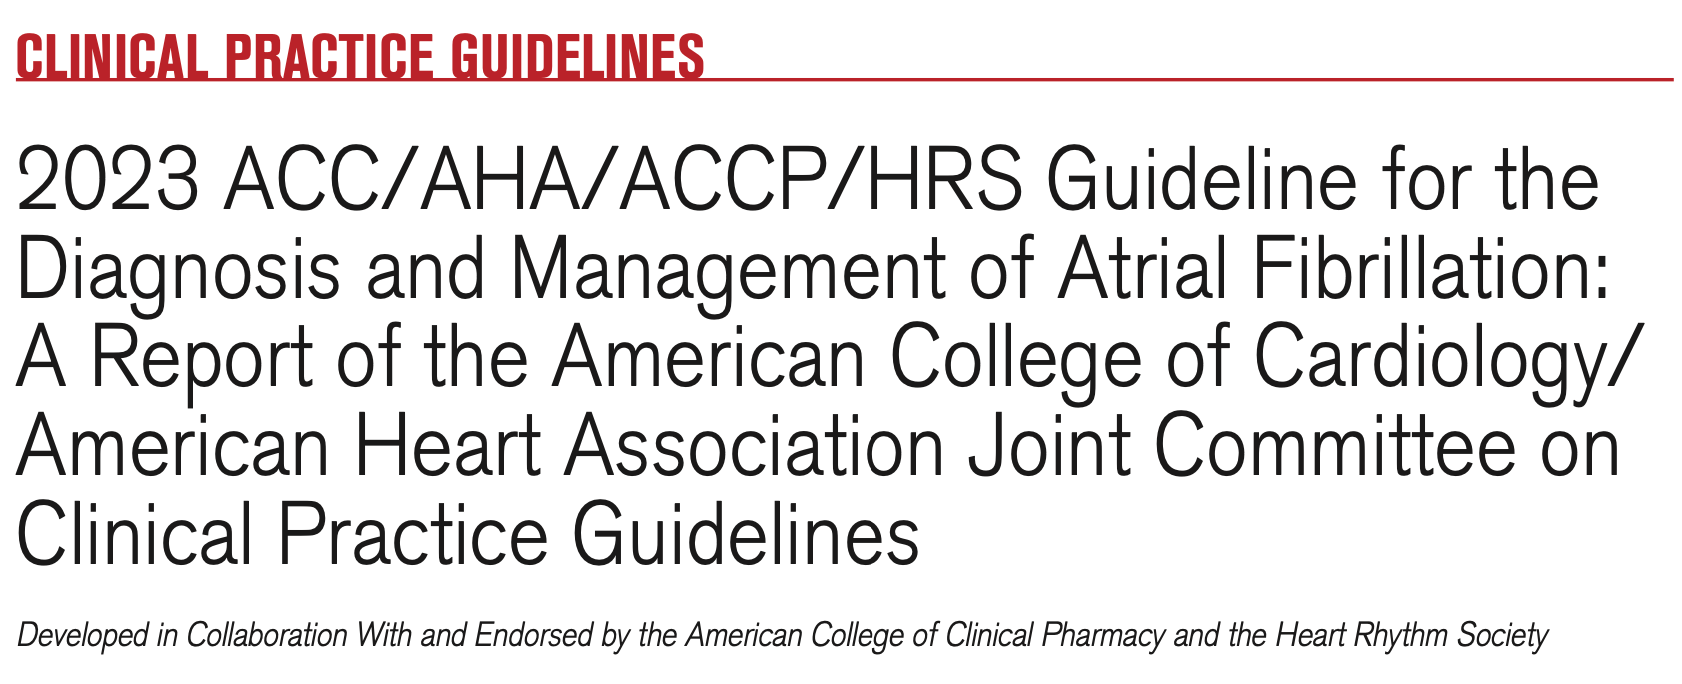 The new Atrial Fibrillation Guidelines are out